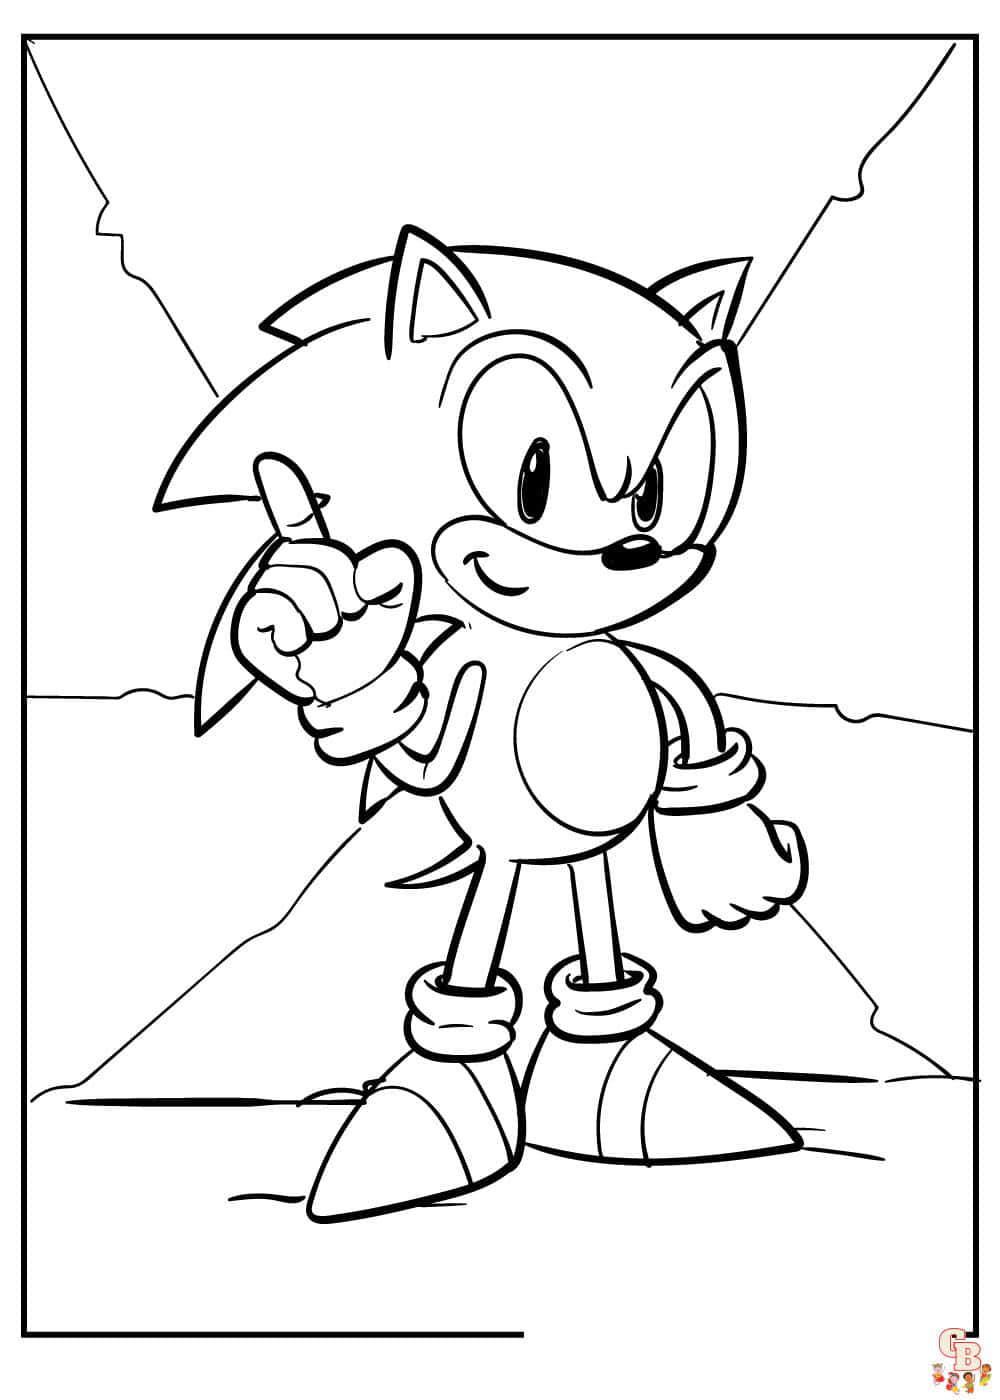 Download Color the memories with Sonic coloring pictures | Wallpapers.com